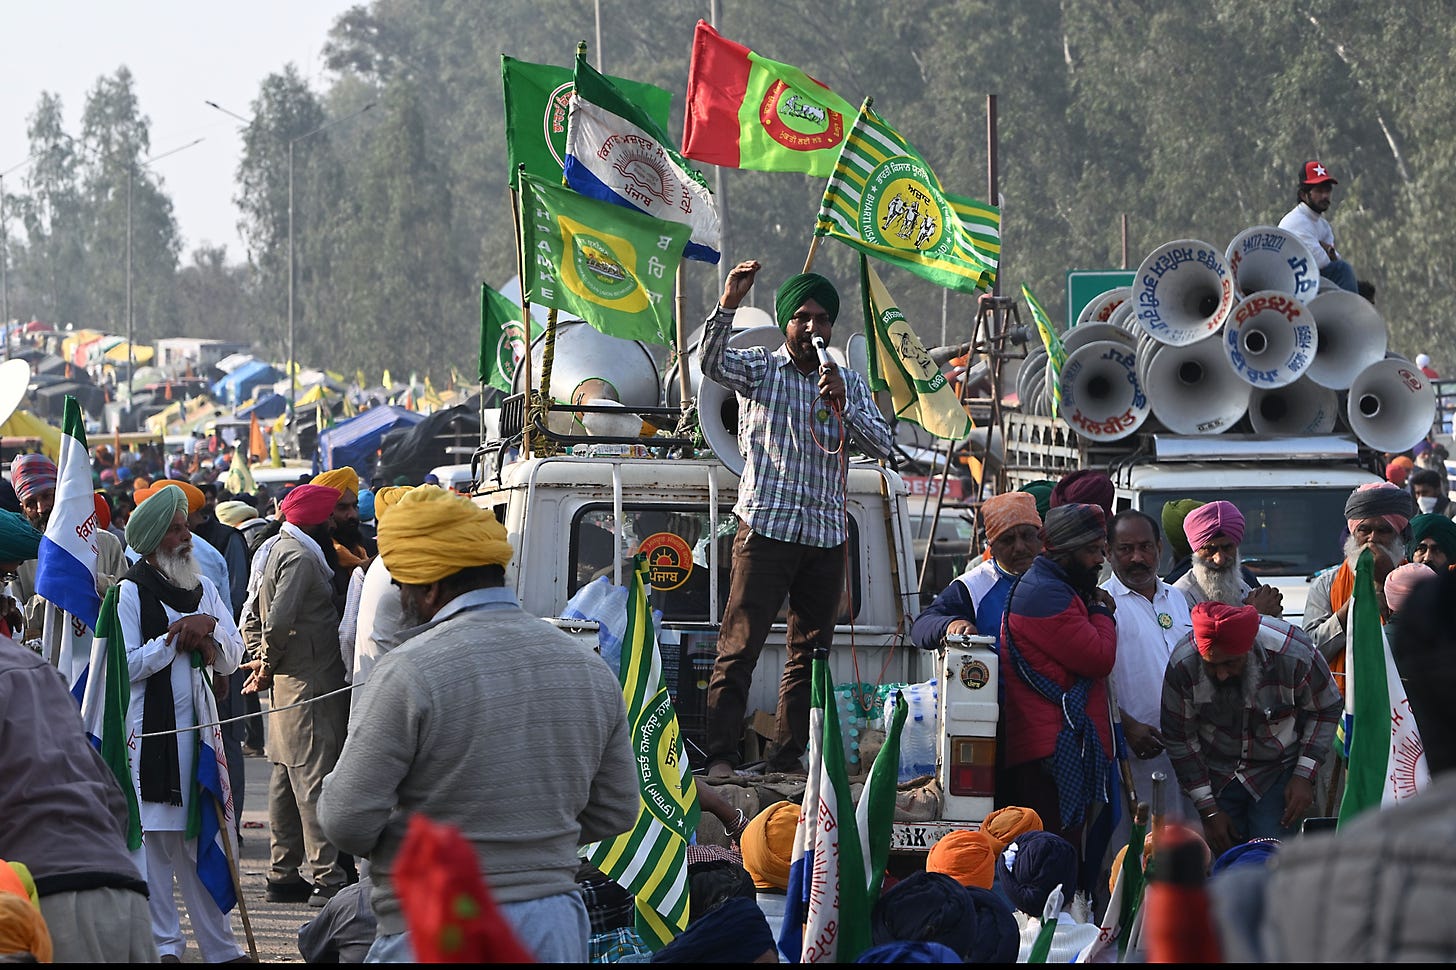 Indian Farmers Gear Up for Talks After Almost Week of Protests - Bloomberg